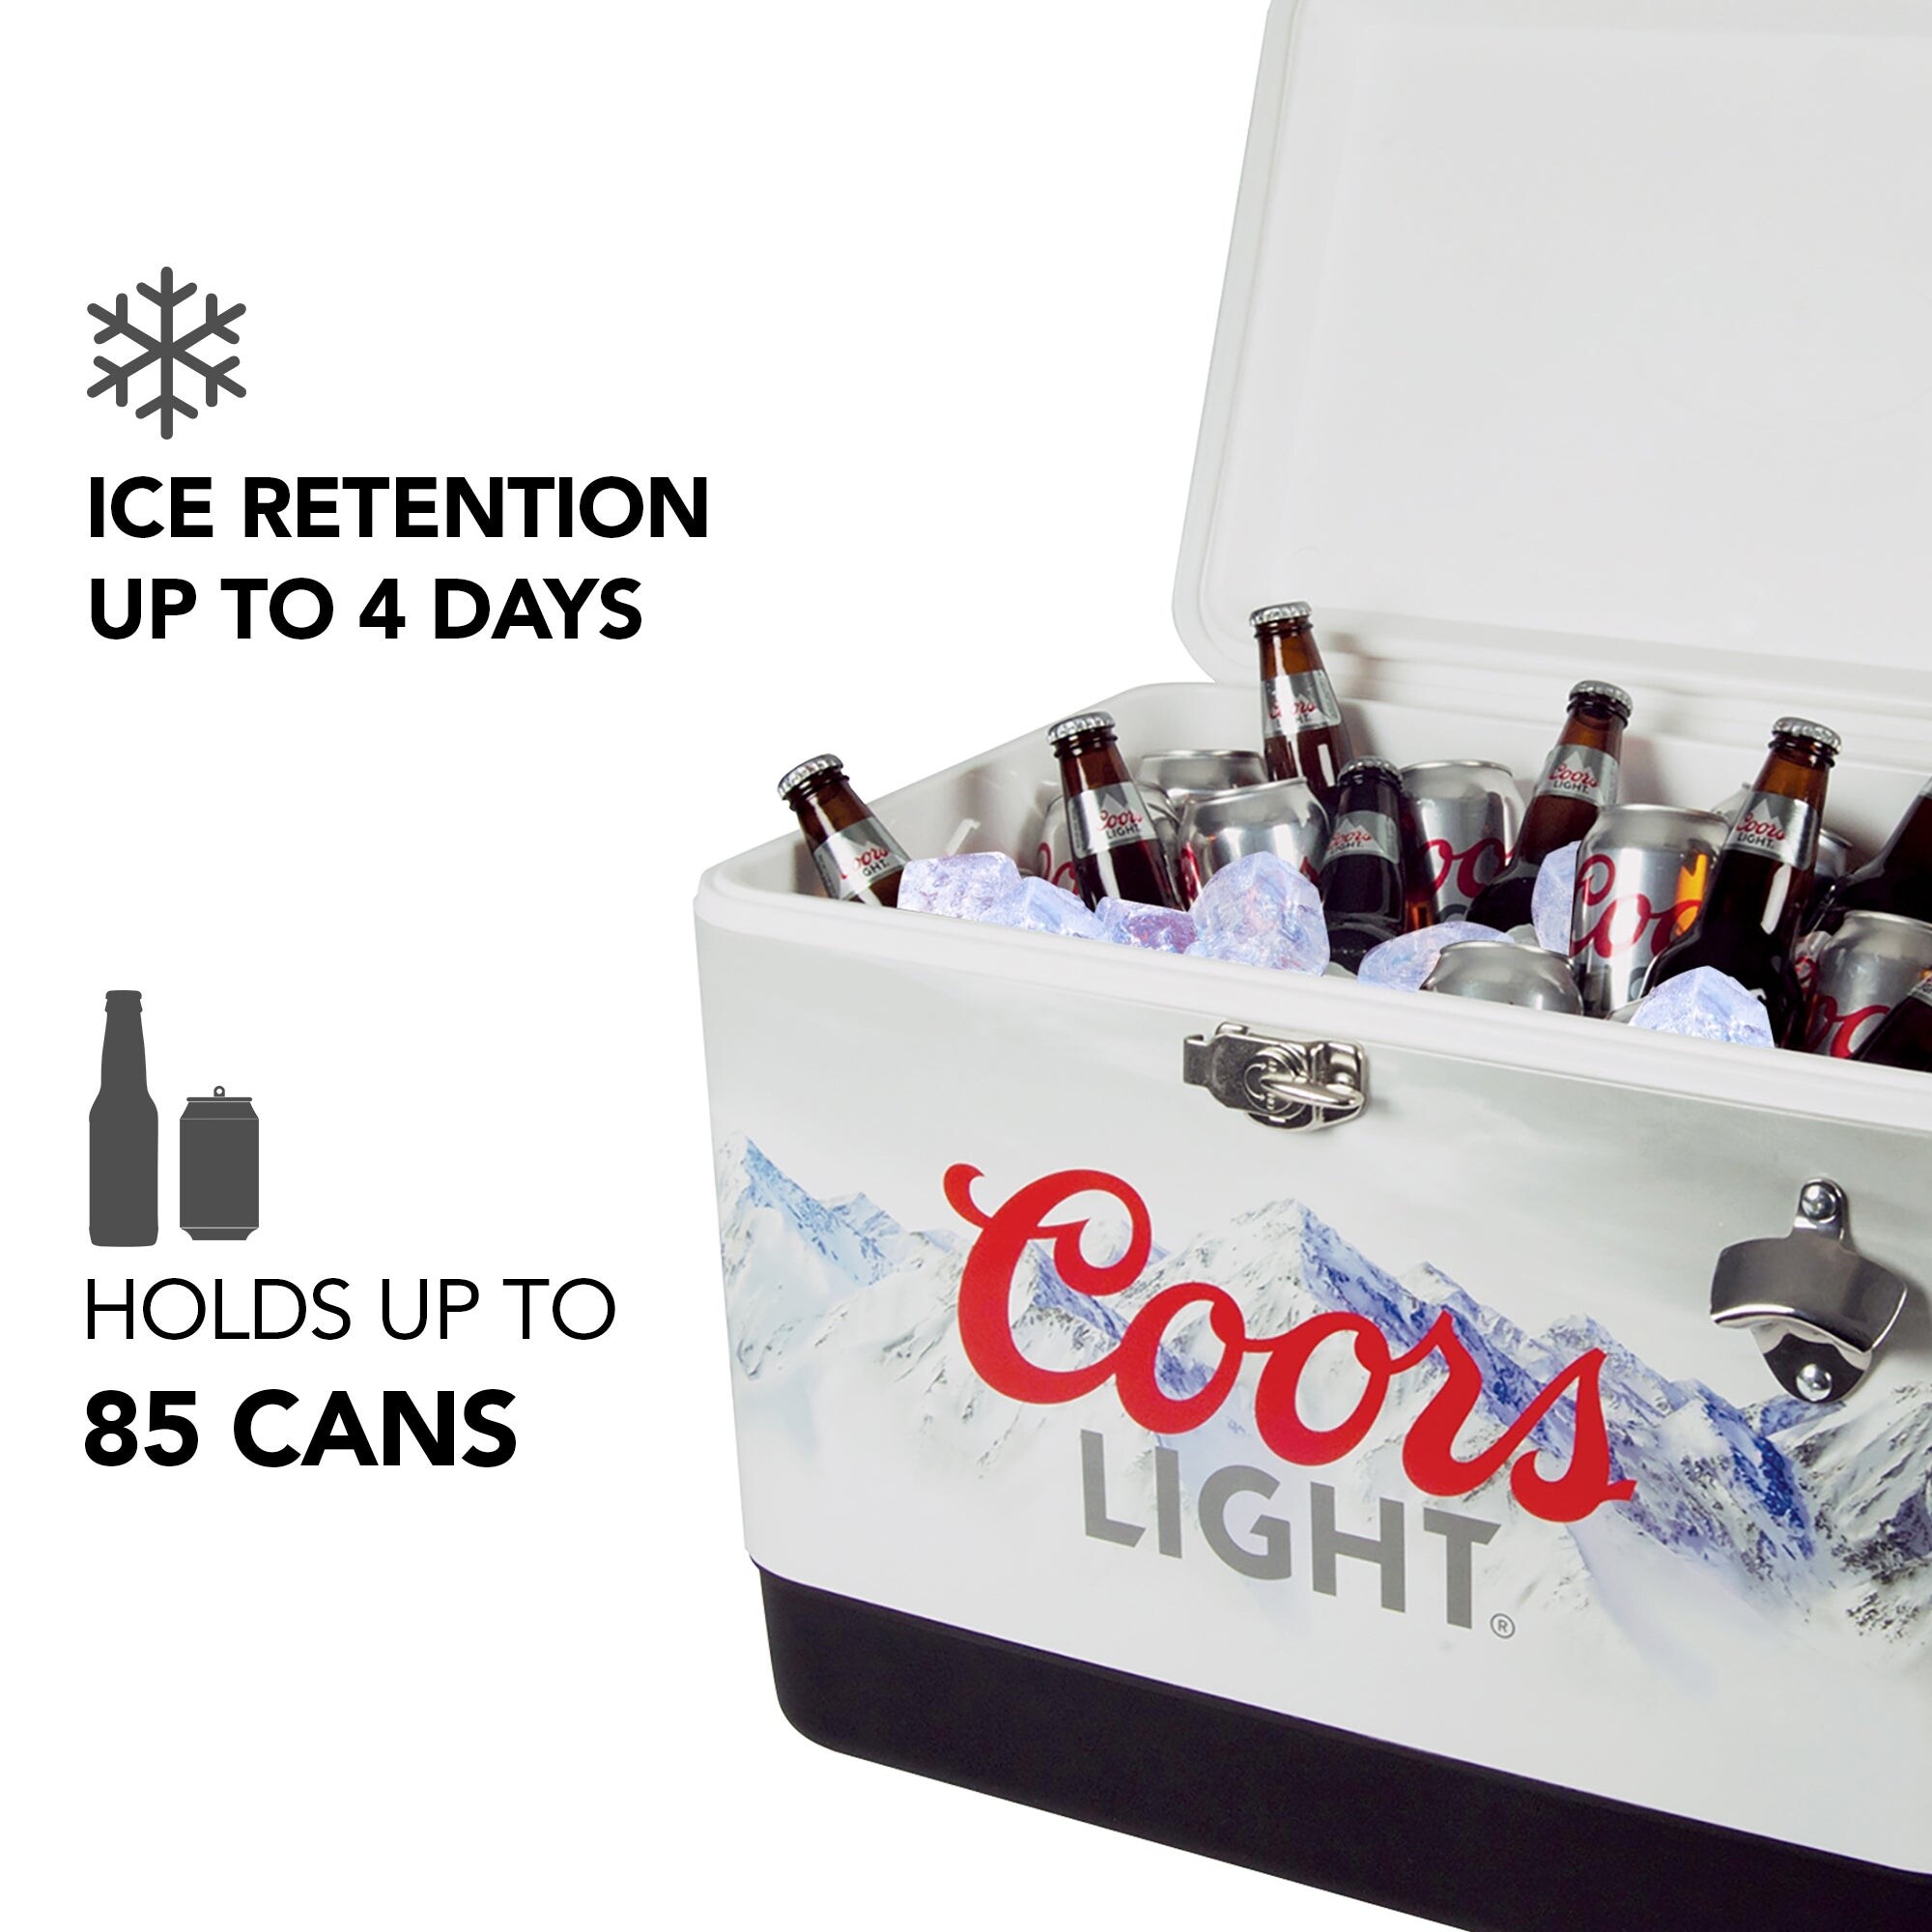 Coors Light 13L Retro Ice Chest Cooler with Bottle Opener